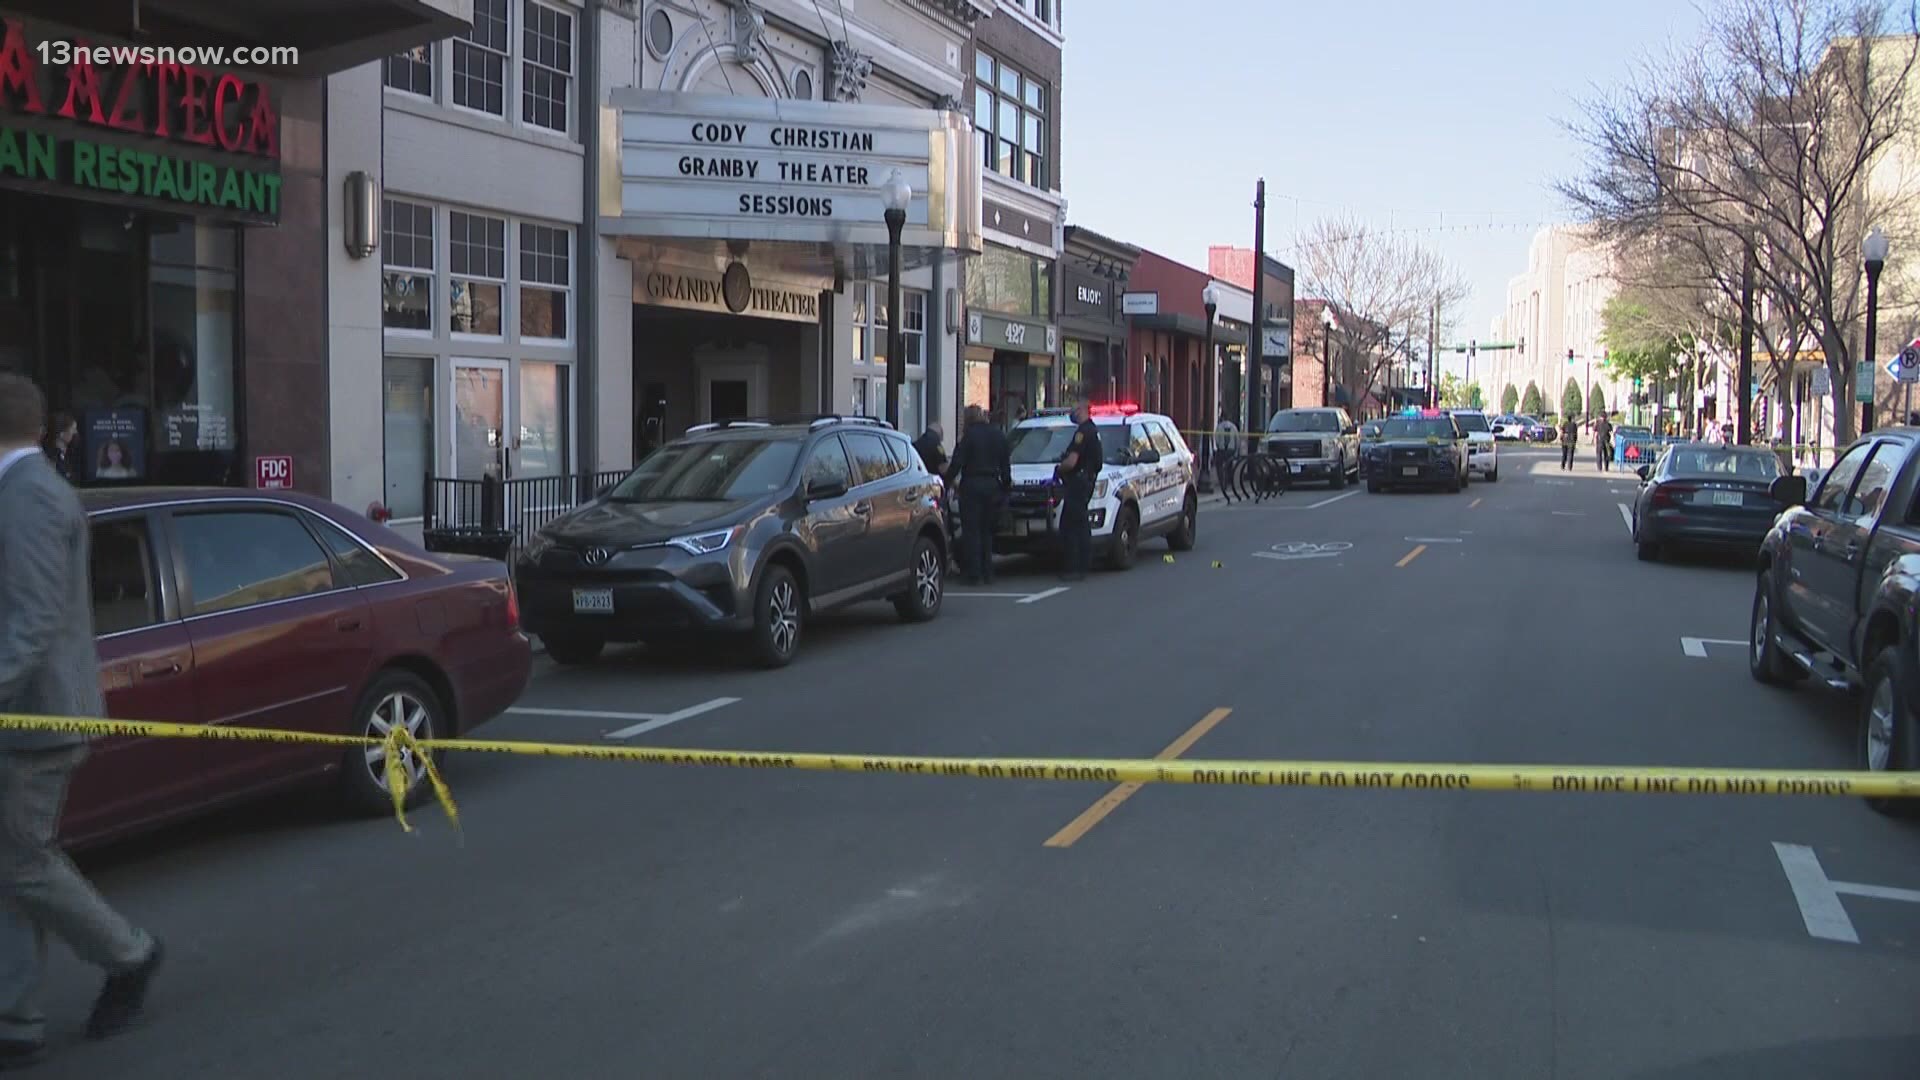 Police Chief Larry Boone said in response to the shooting, additional officers str being assigned to patrol the Granby Street corridor in Downtown Norfolk.